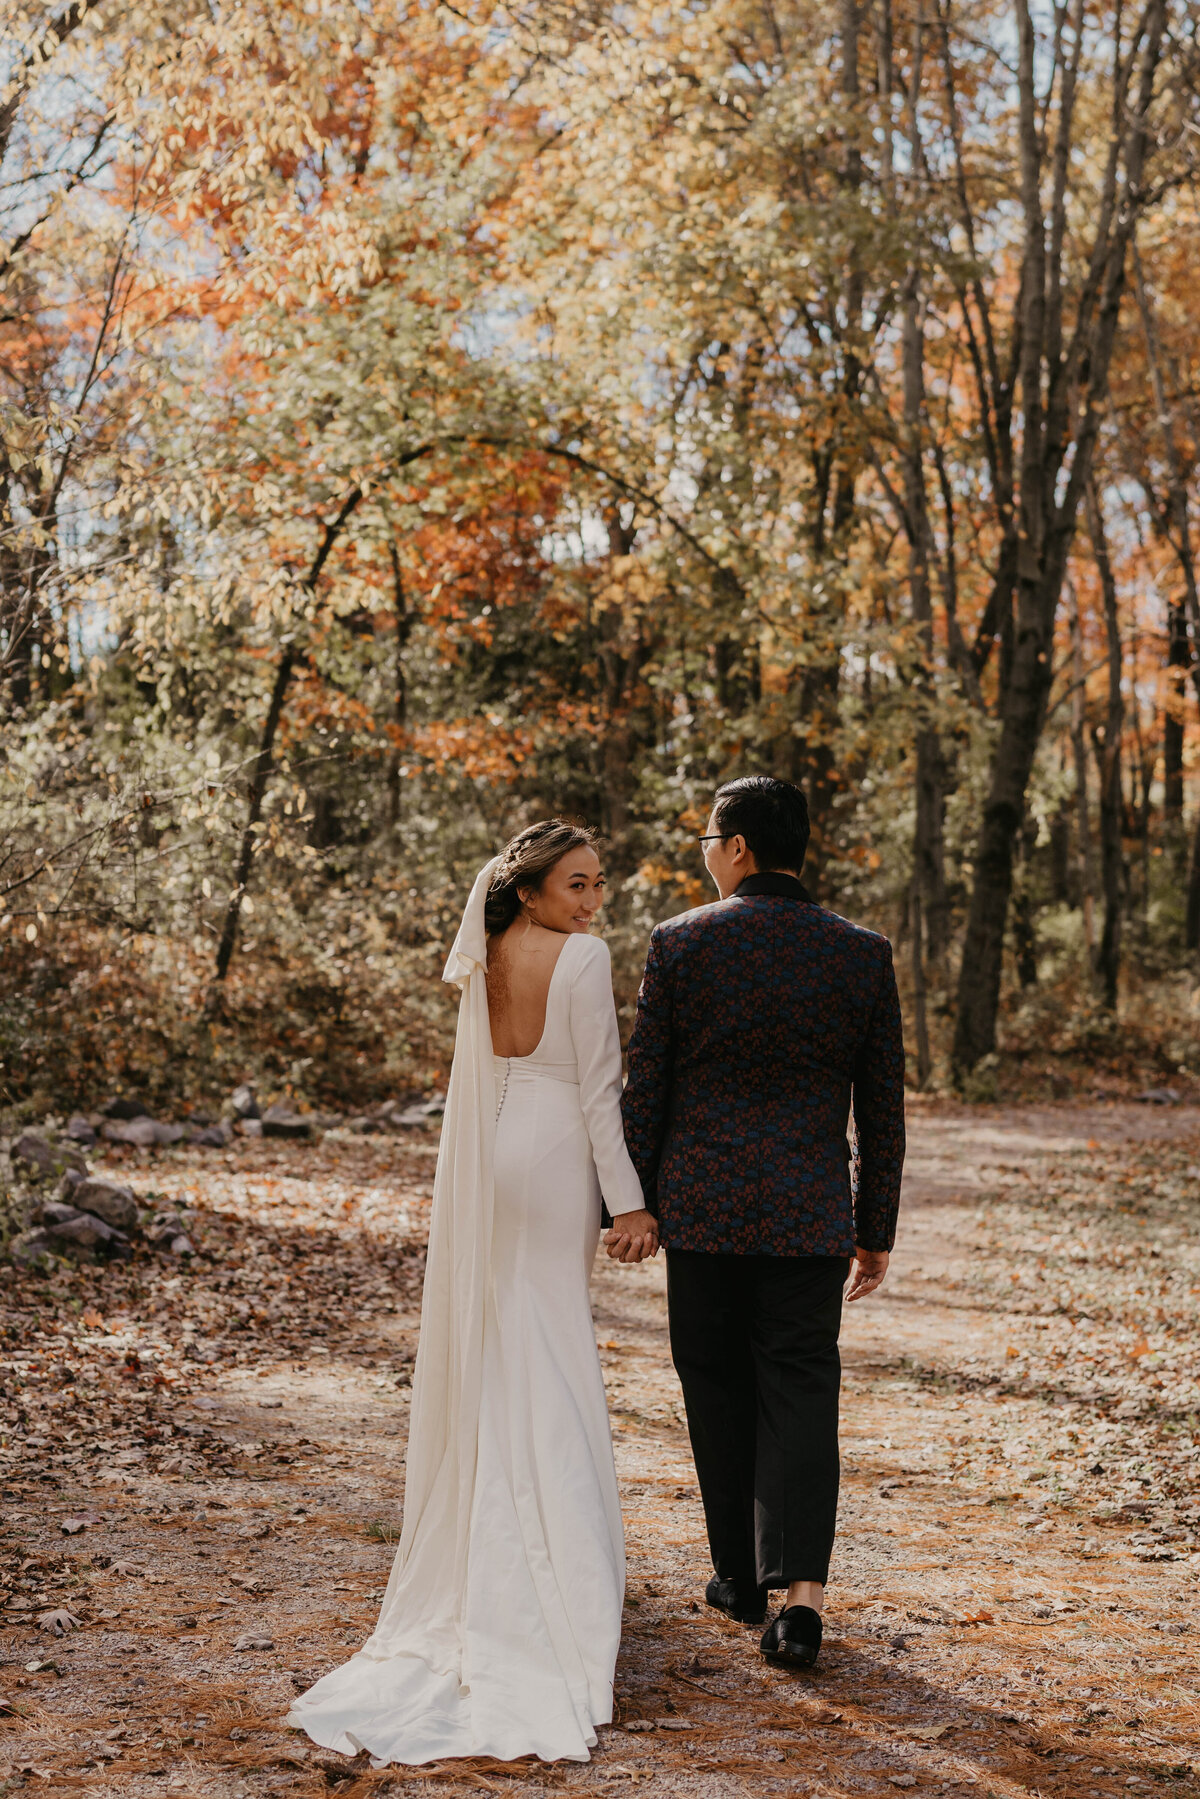 Boho Rustic Barn Wedding at The Swan Barn Door in Wisconsin Dells. Wild Love Pursuit is a wedding and elopement photographer, based in Wisconsin and available for travel worldwide. Modern, romantic and timeless wedding photography for adventurous couples.